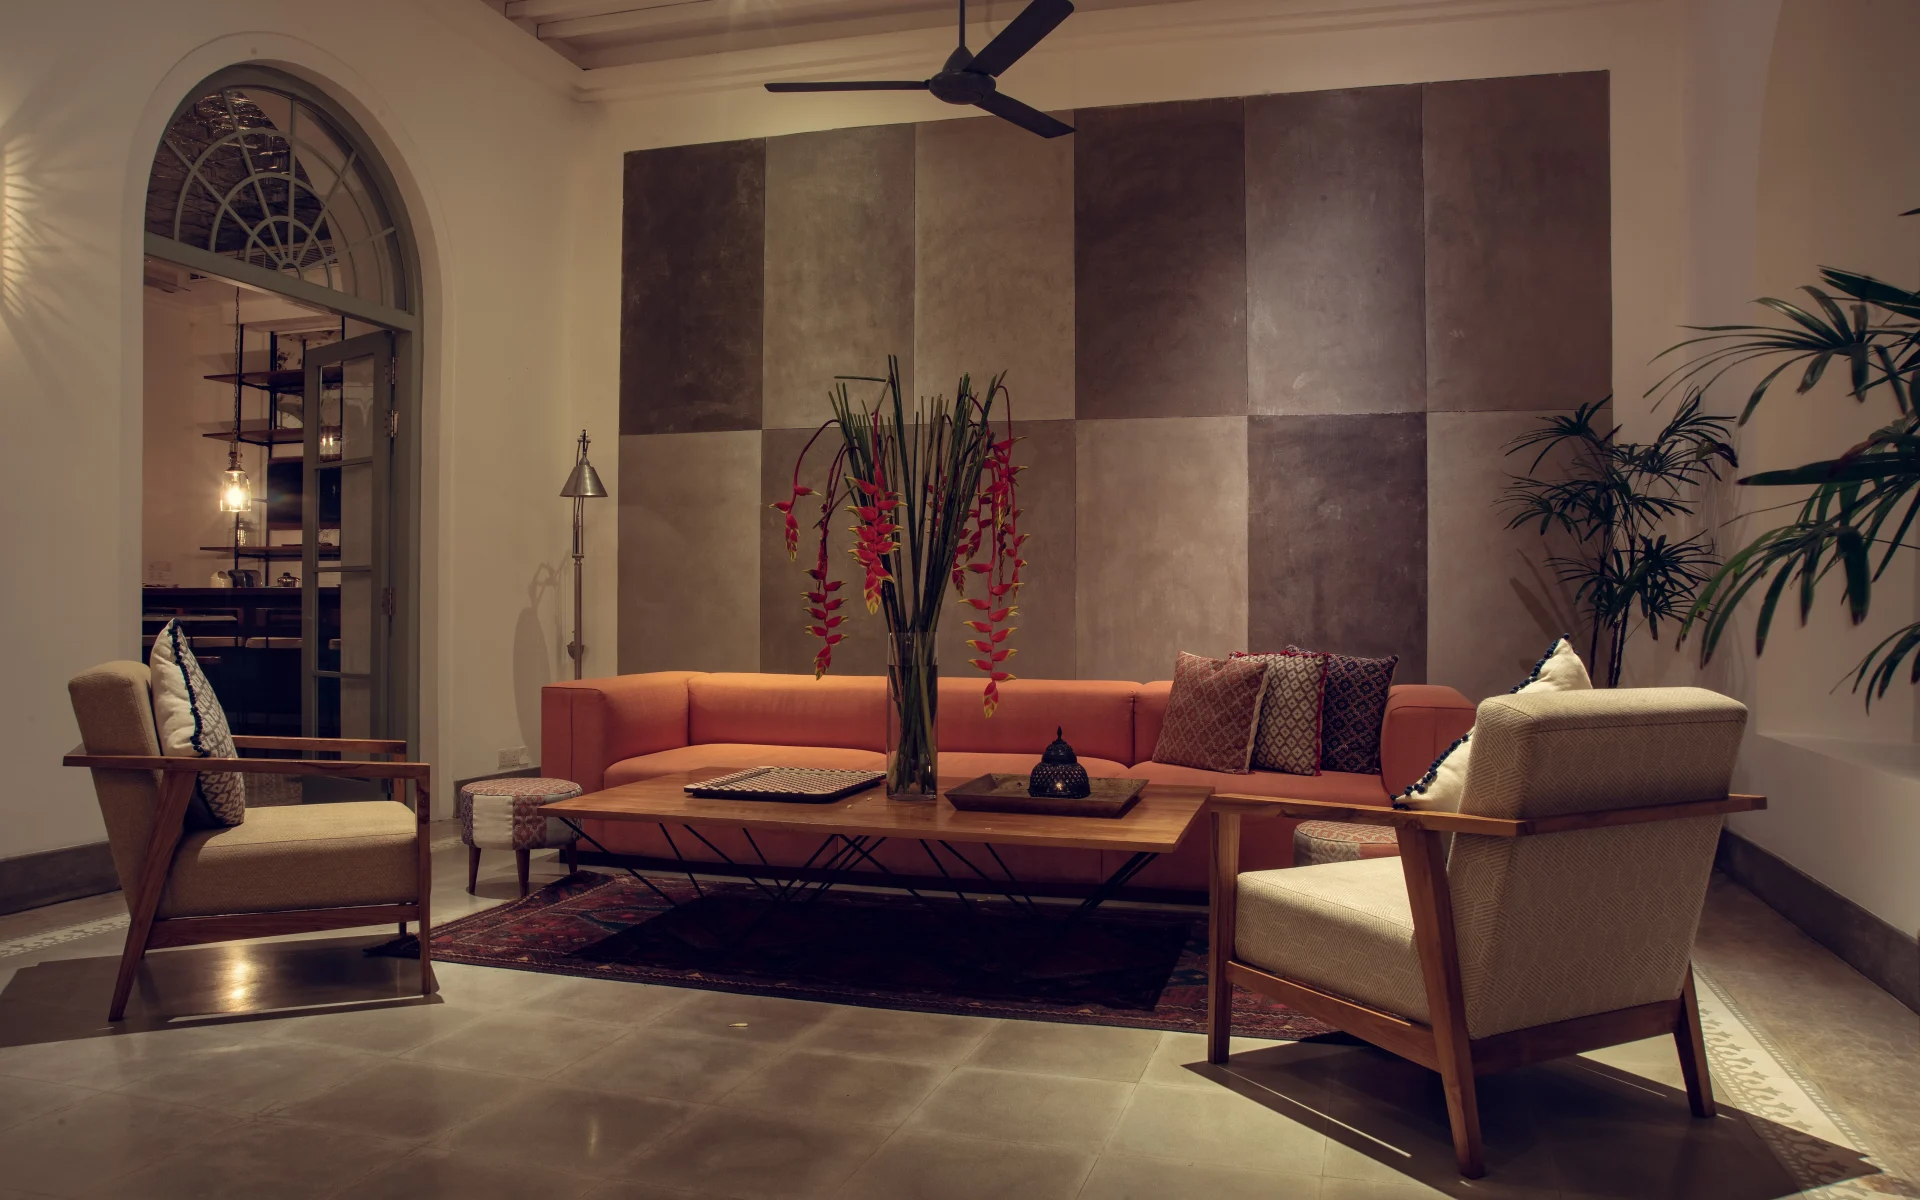 The hotel lobby is dressed in a neutral colour palette, accented by splashes of orange and red tones. There is a large sofa and two arm chairs.